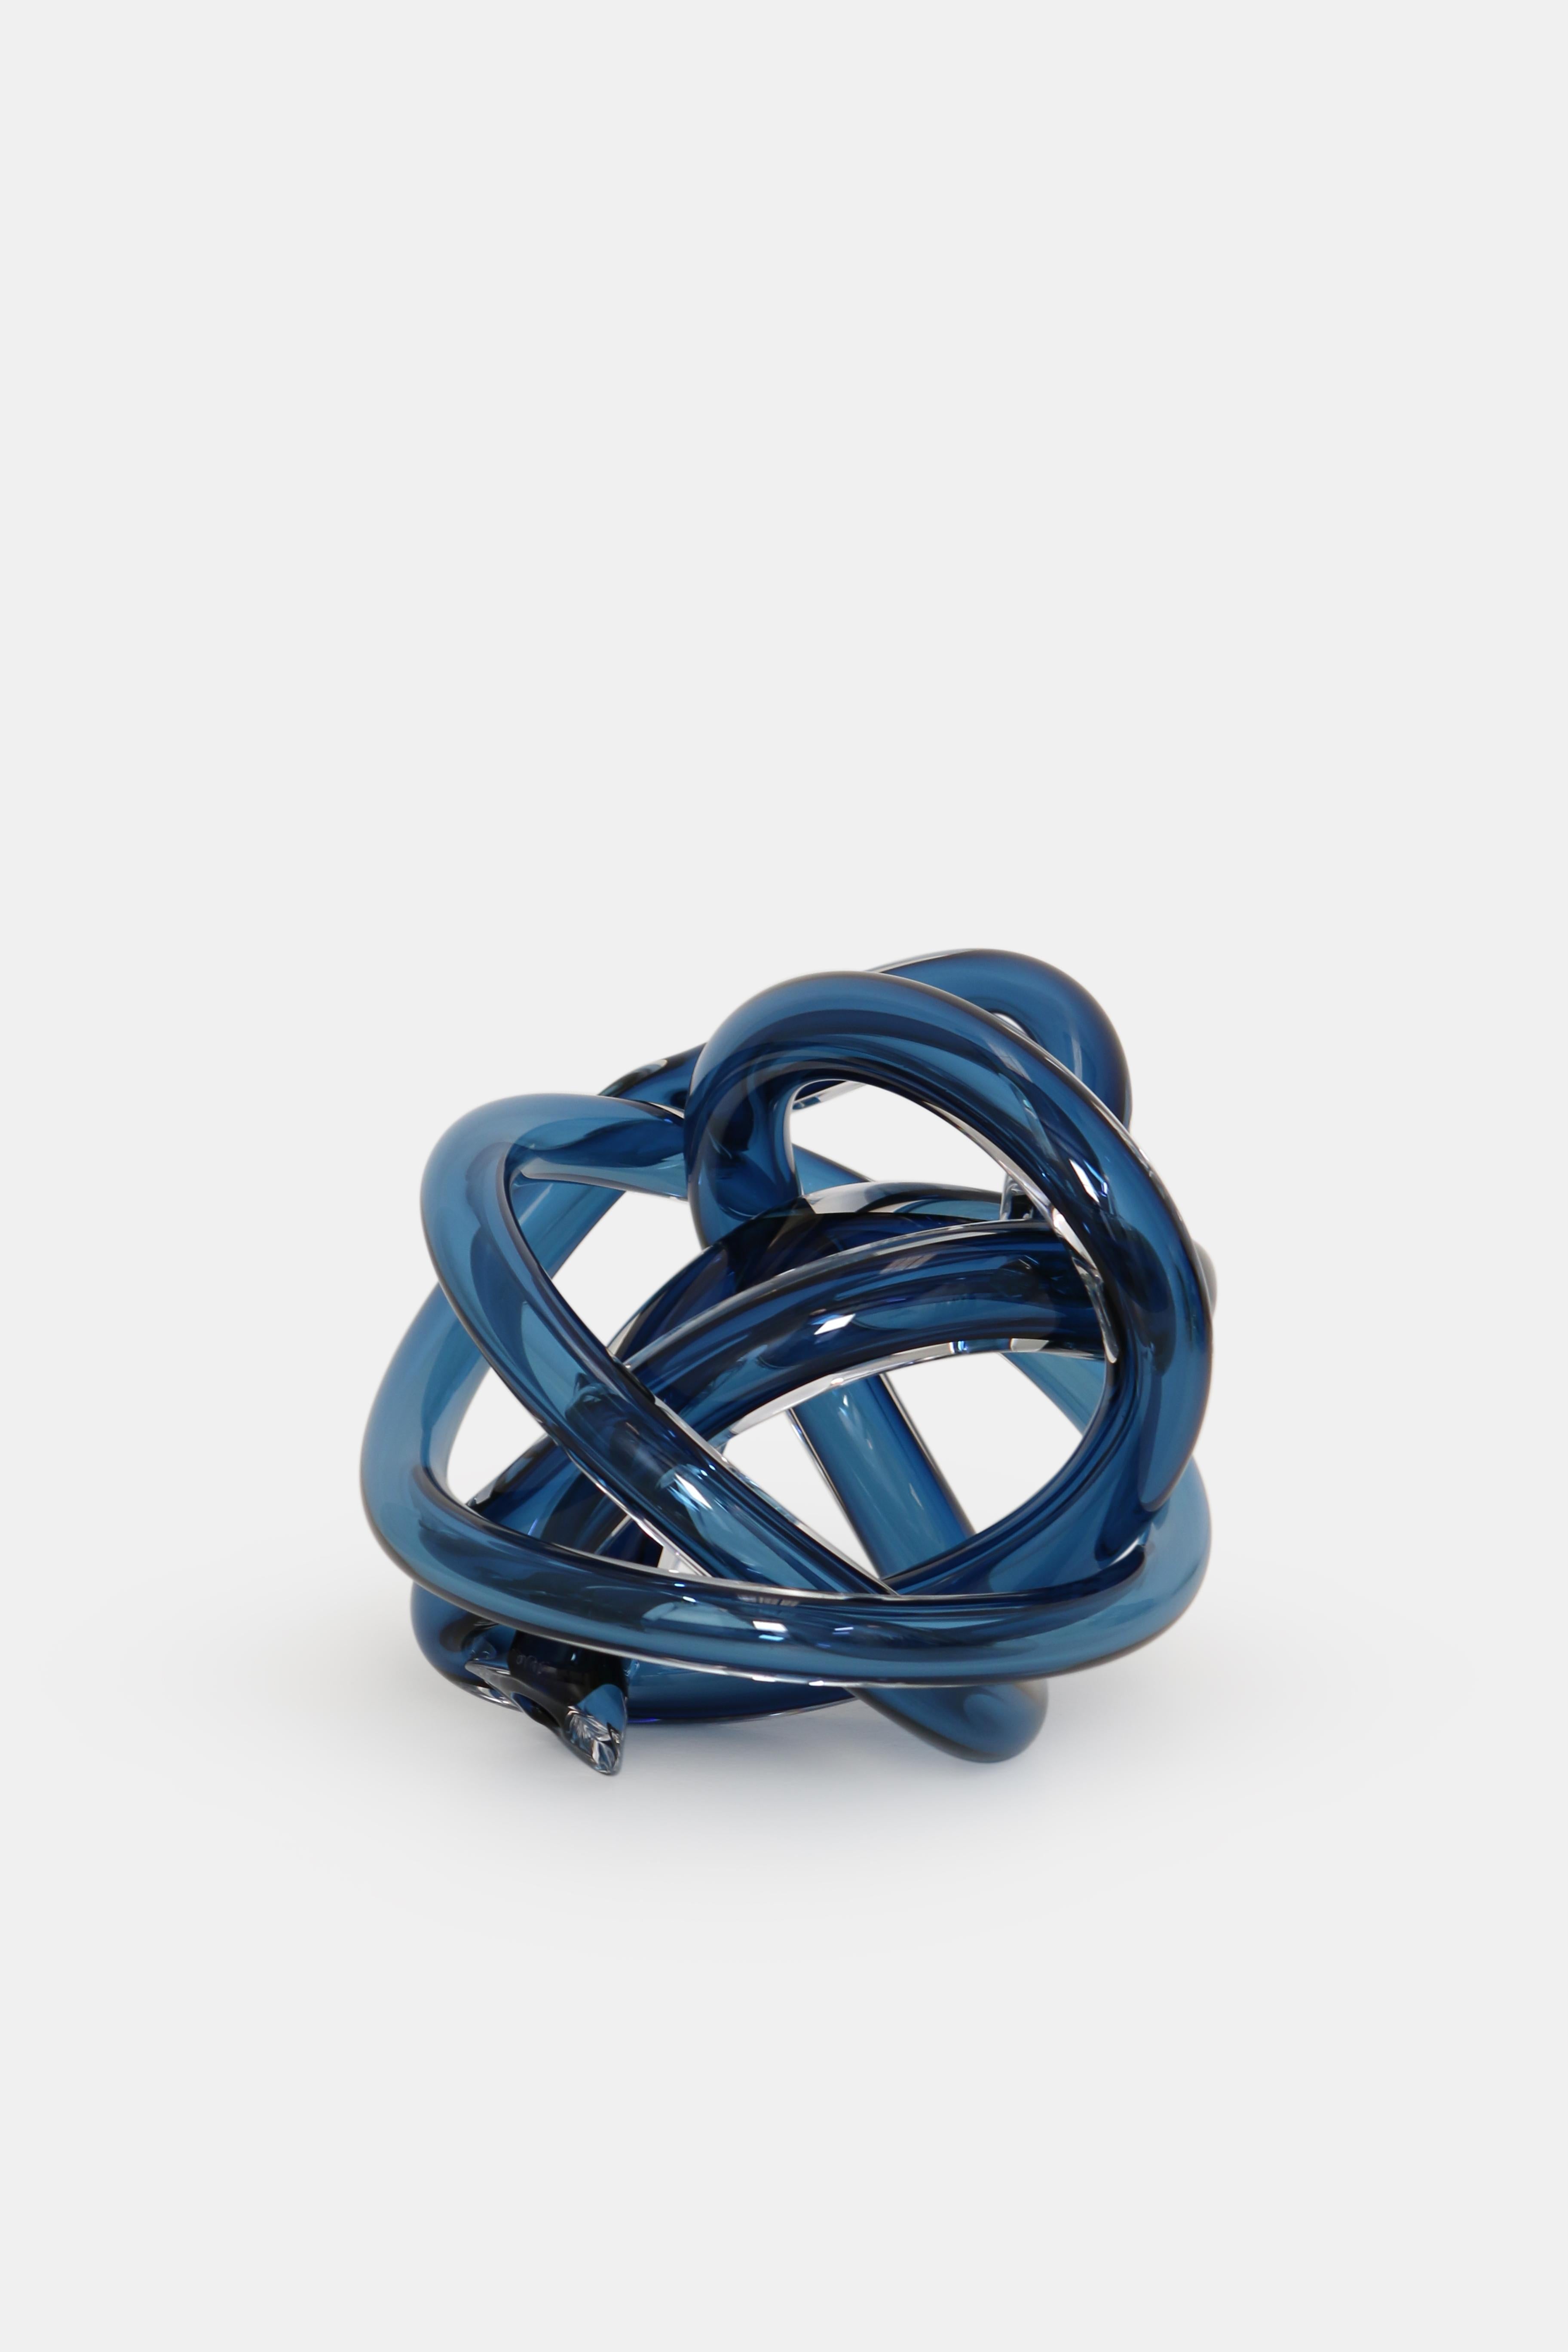 Large steel blue wrap sculpture by SkLO
Dimensions: D 25 cm
Materials: glass
Available in other size and colors.

SkLO large wrap objects are a larger version of the classic SkLO Wrap, a wound length of handblown Czech glass tube. Each SkLO